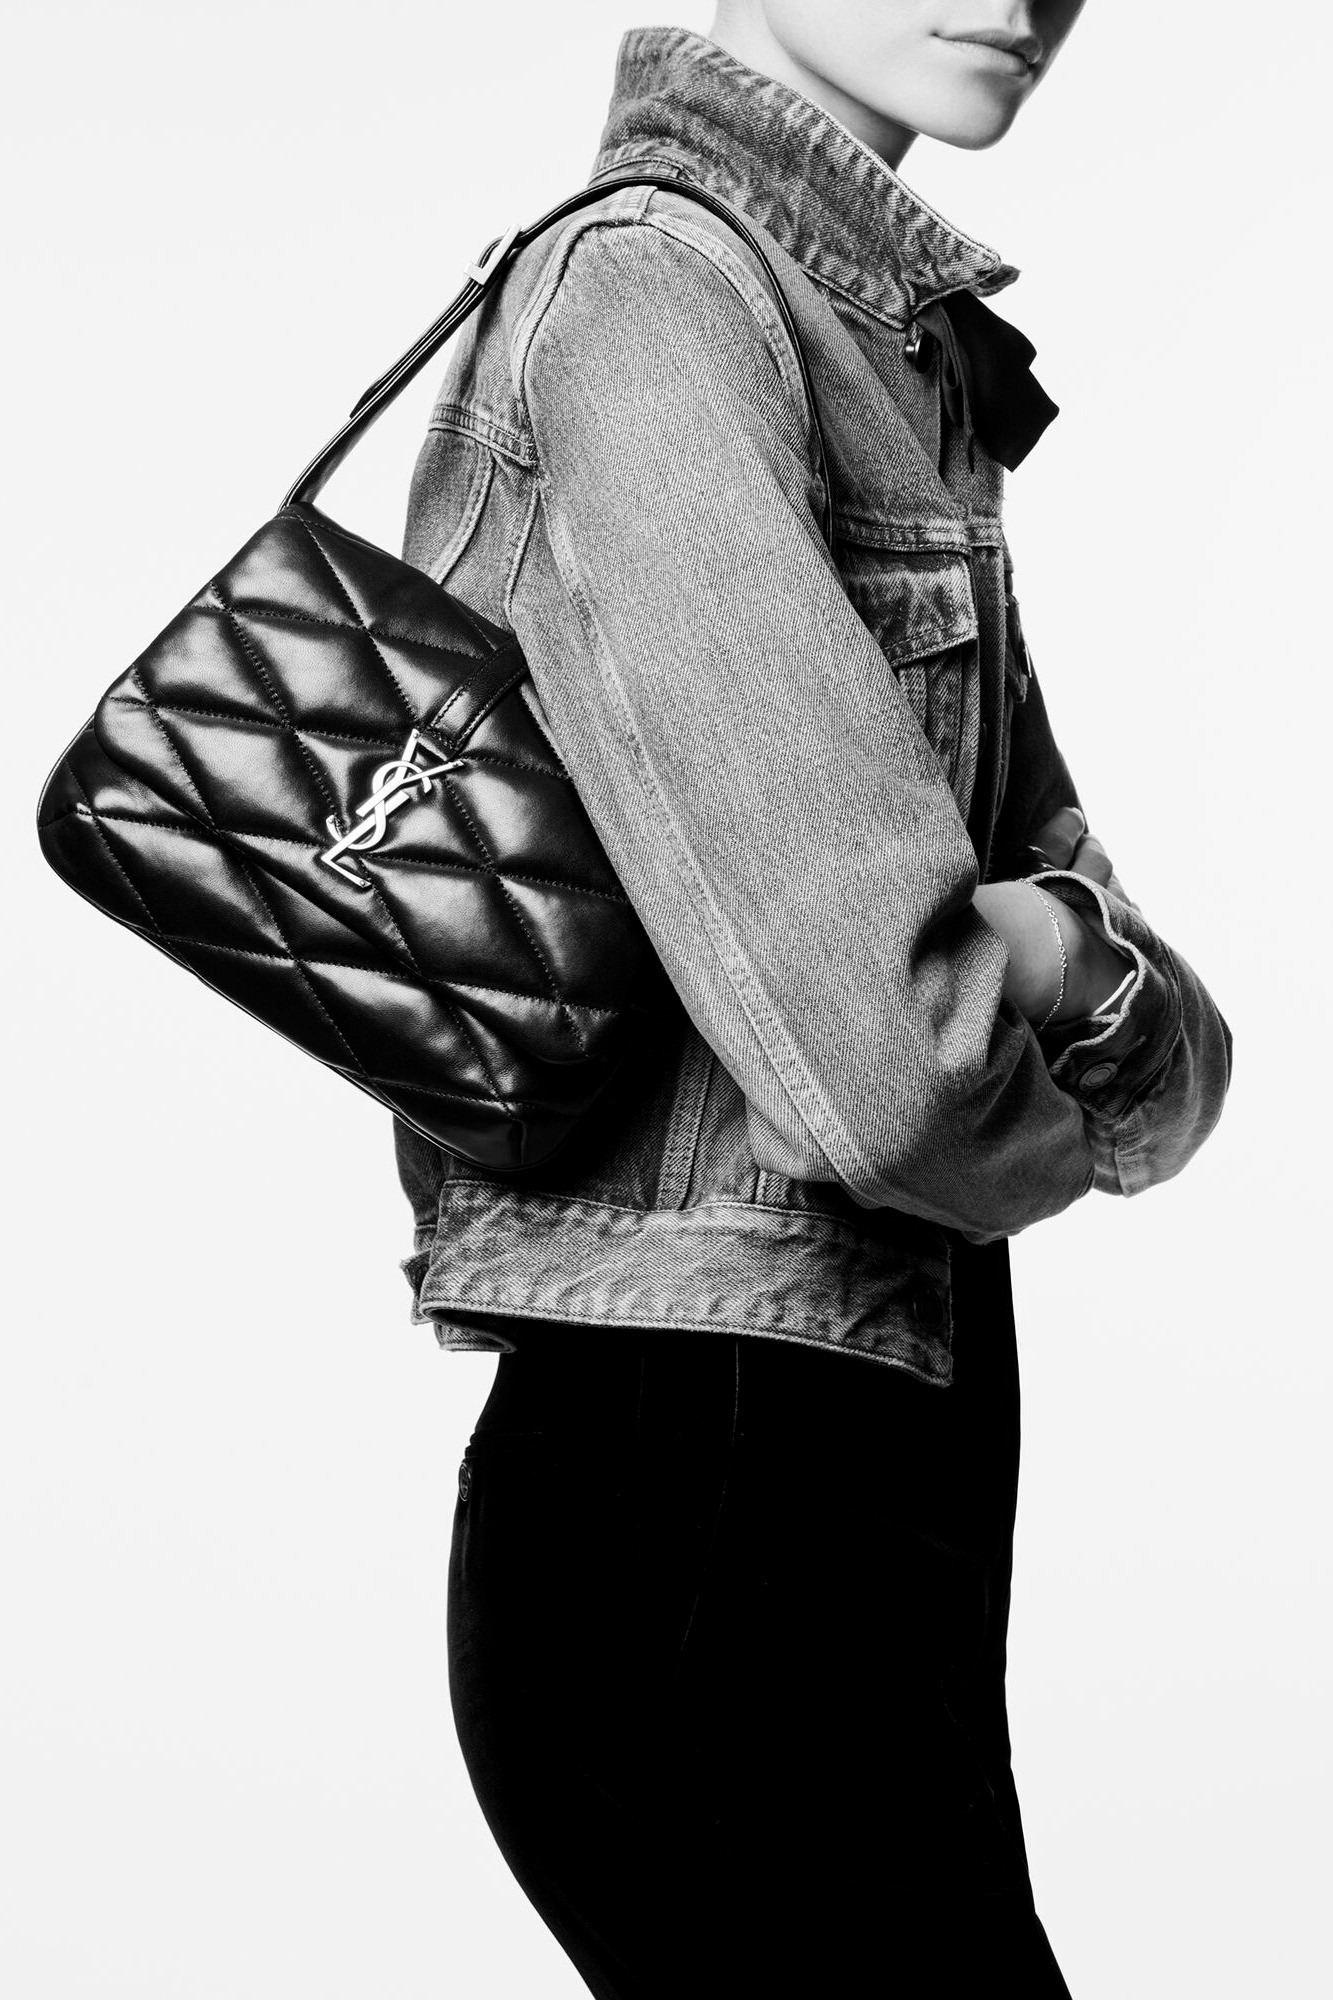 LE 57 HOBO BAG IN QUILTED LAMBSKIN - Black